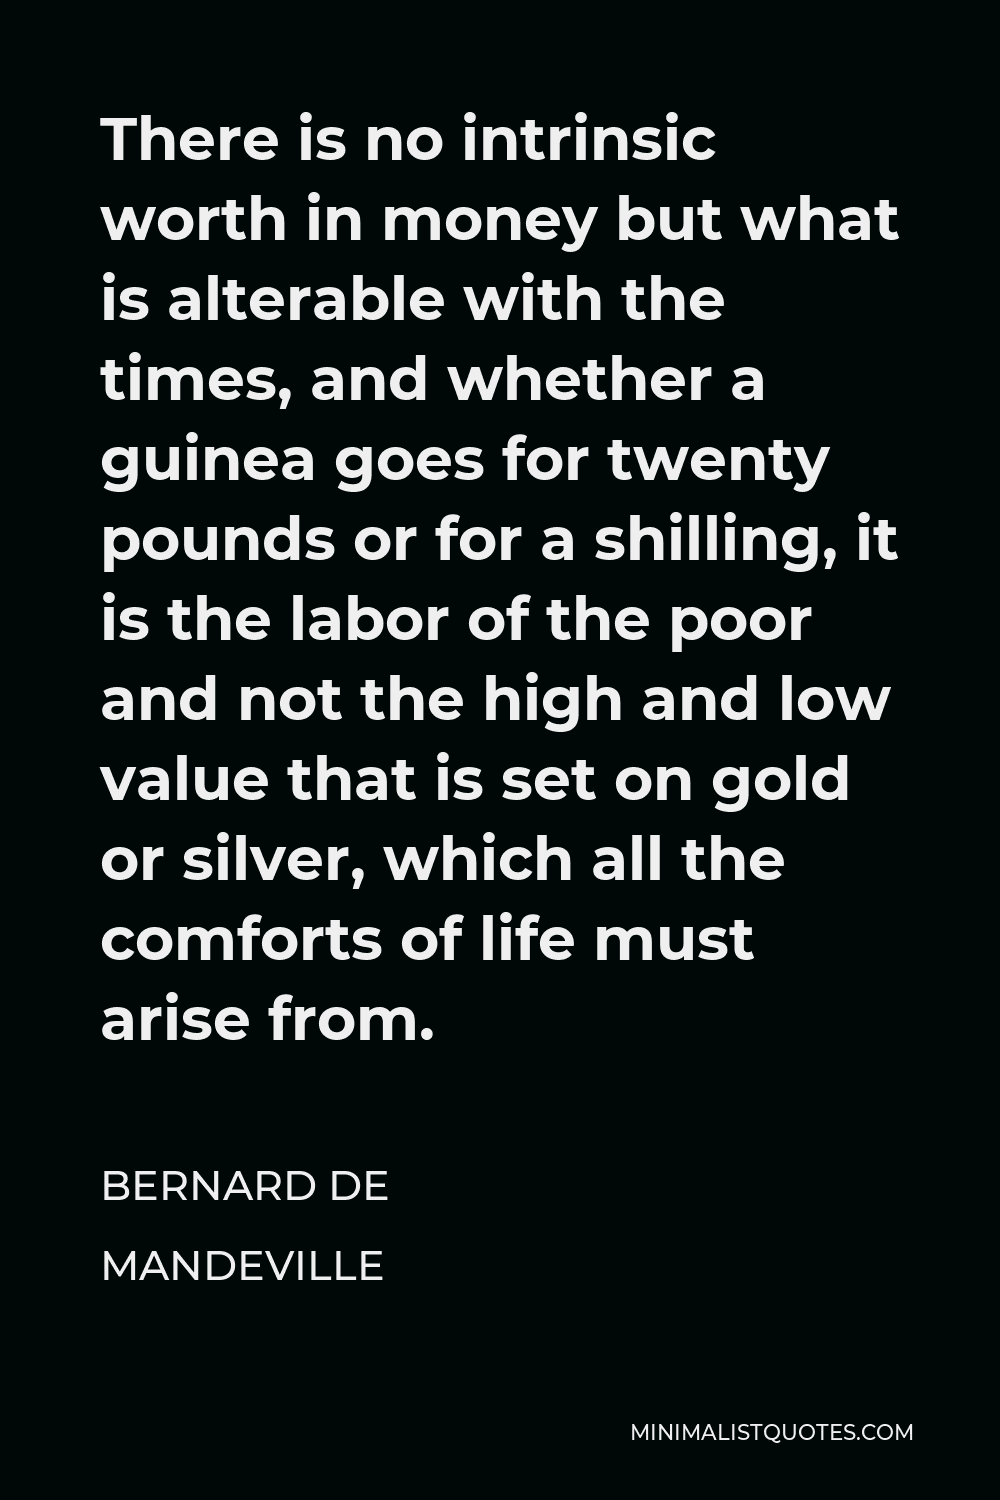 Bernard de Mandeville Quote - There is no intrinsic worth in money but what is alterable with the times, and whether a guinea goes for twenty pounds or for a shilling, it is the labor of the poor and not the high and low value that is set on gold or silver, which all the comforts of life must arise from.